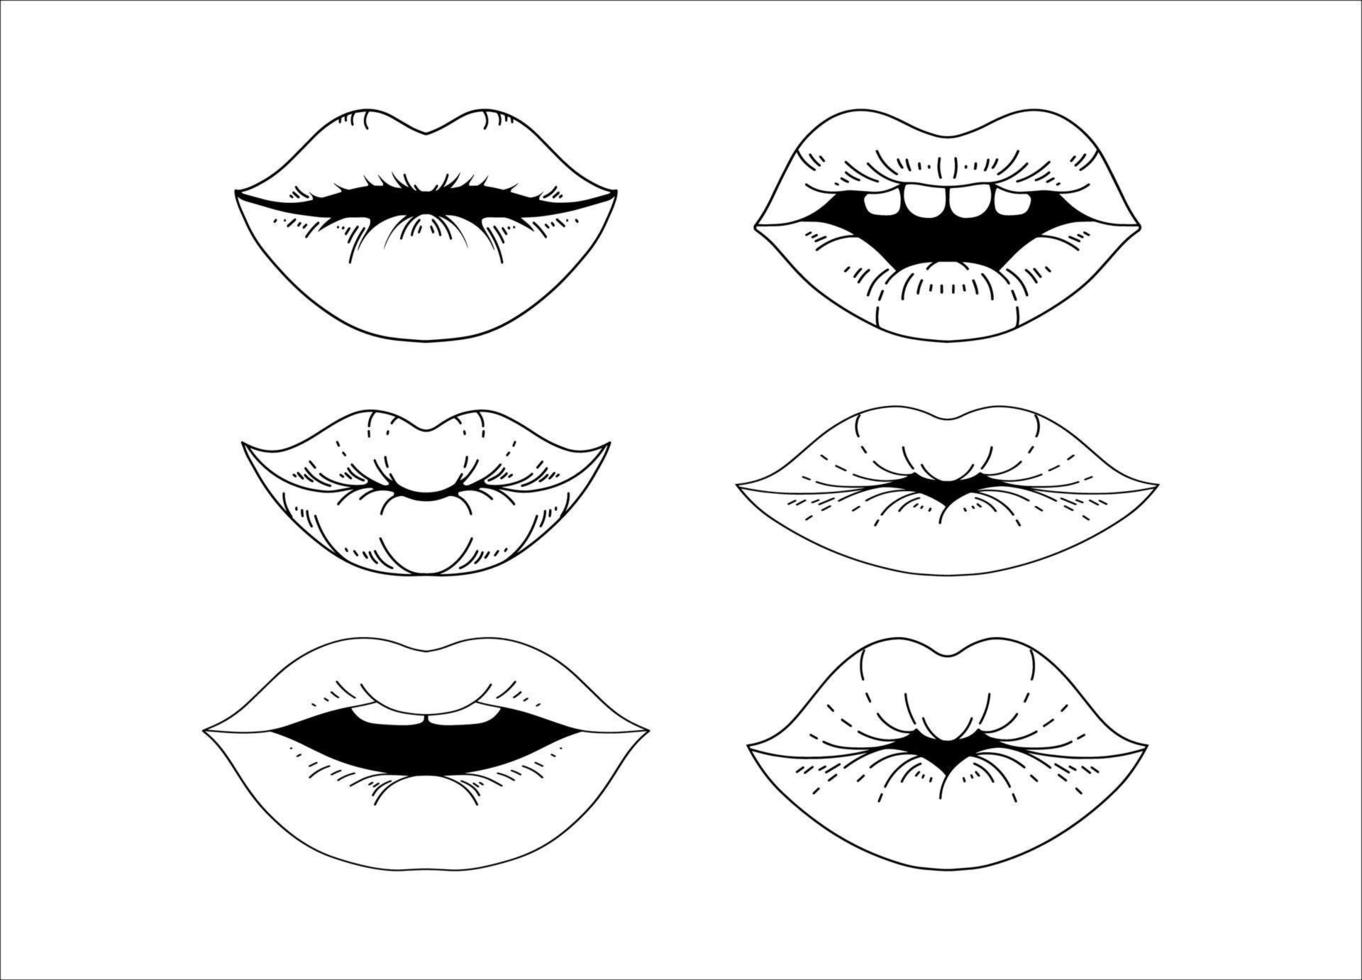 Lips Black and White Illustrations Collection Isolated on White Background vector